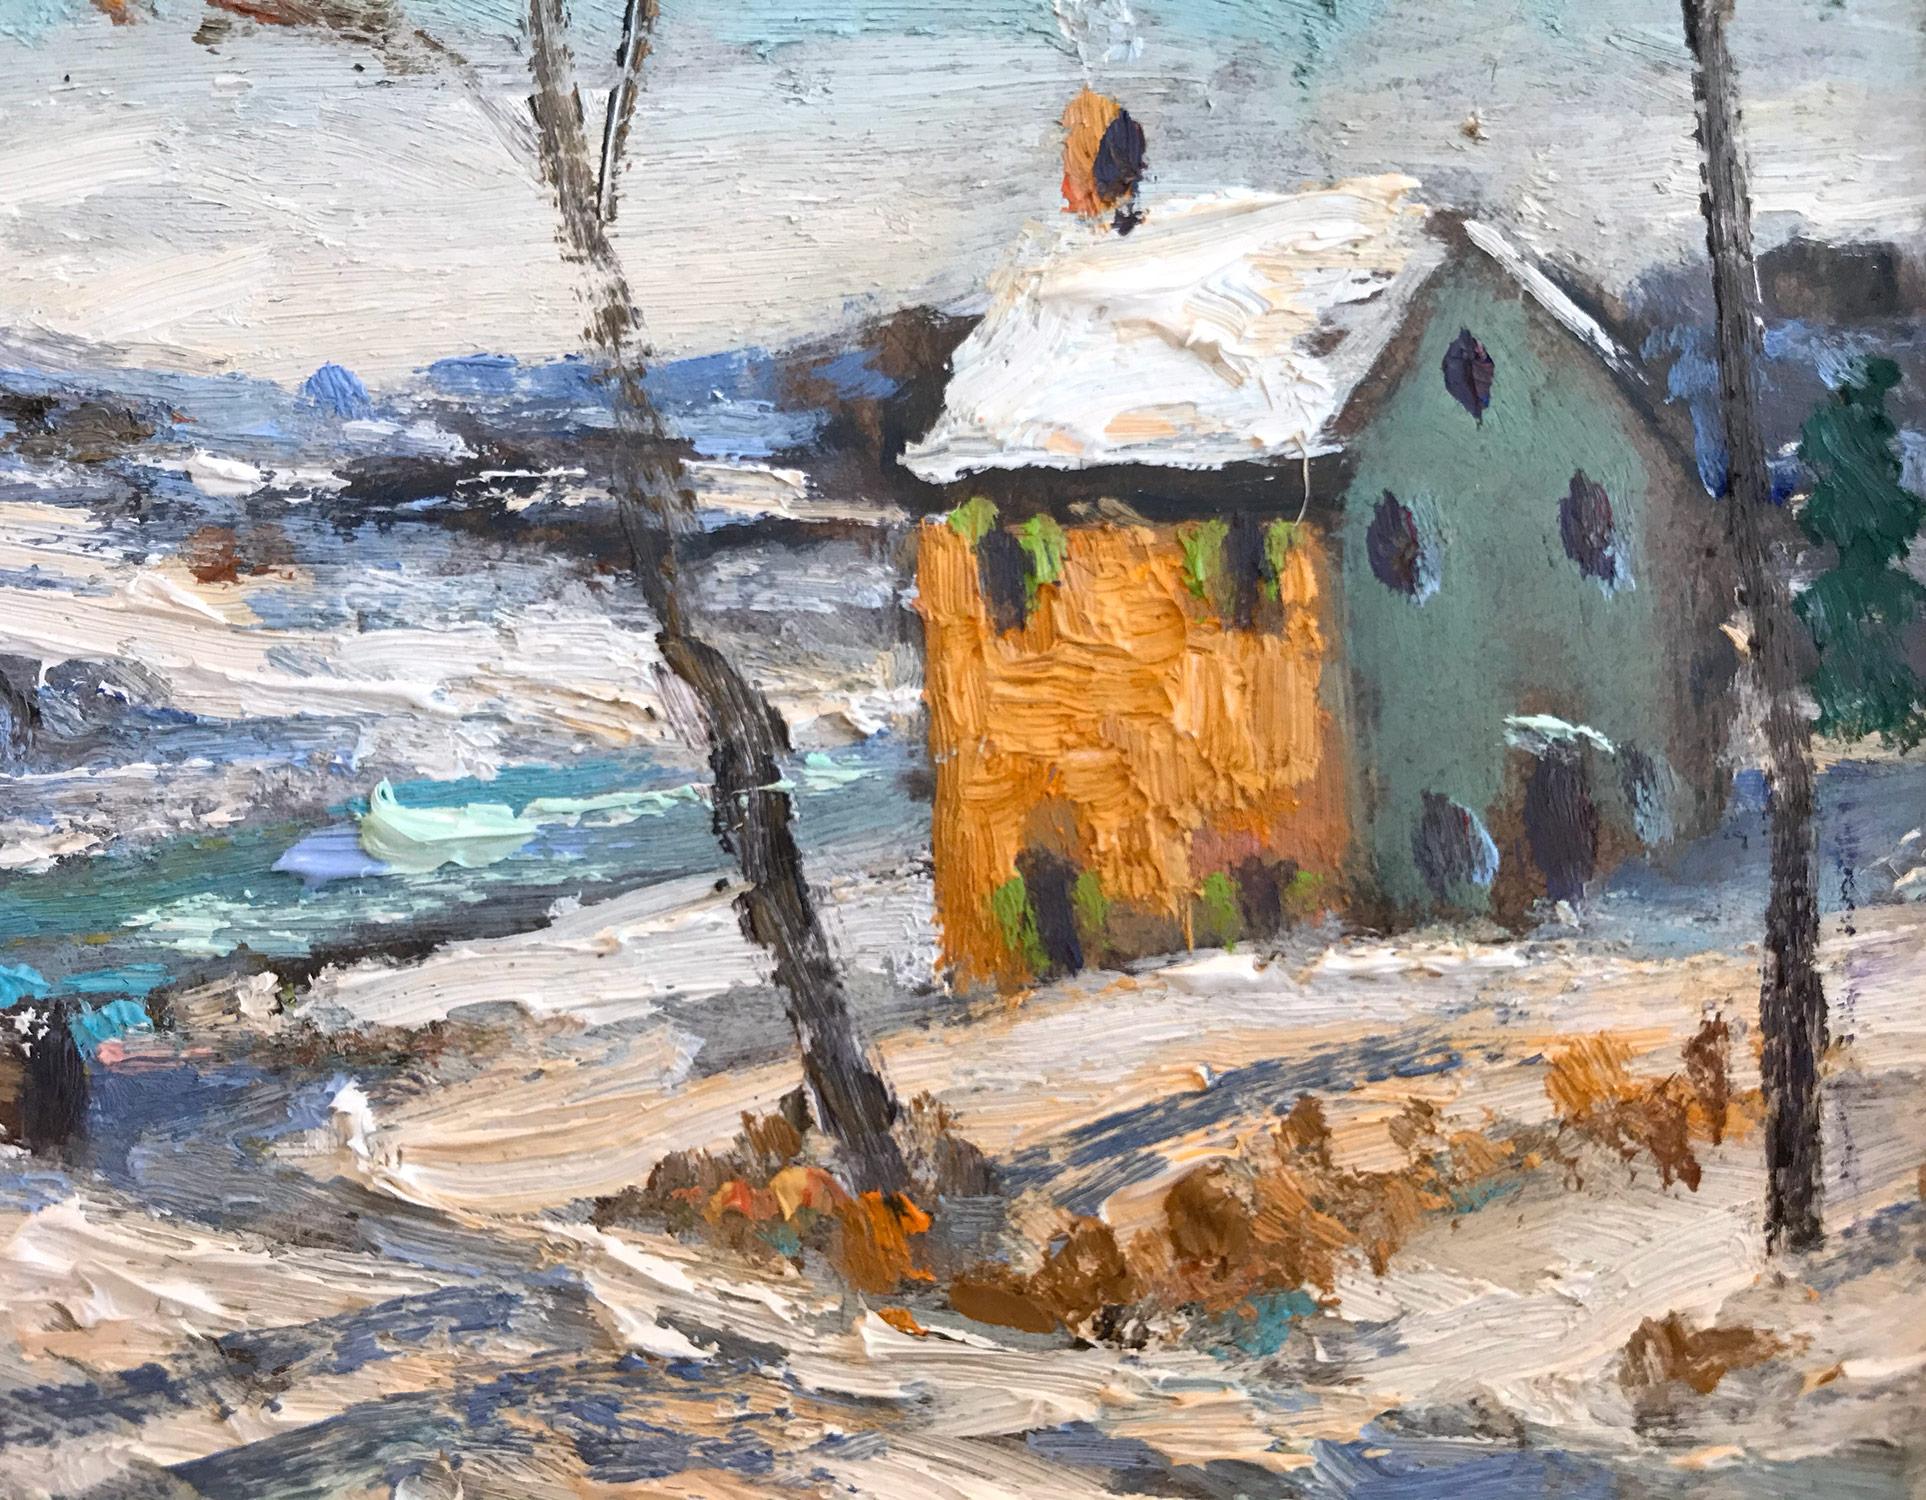 Impressionist winter pastoral scene of a quaint snow covered bridge and farm house in Upper Bucks County, PA. Willet has portrayed this piece in a most intimate, yet energetic way, and has packed much feeling into this miniature work. It is almost